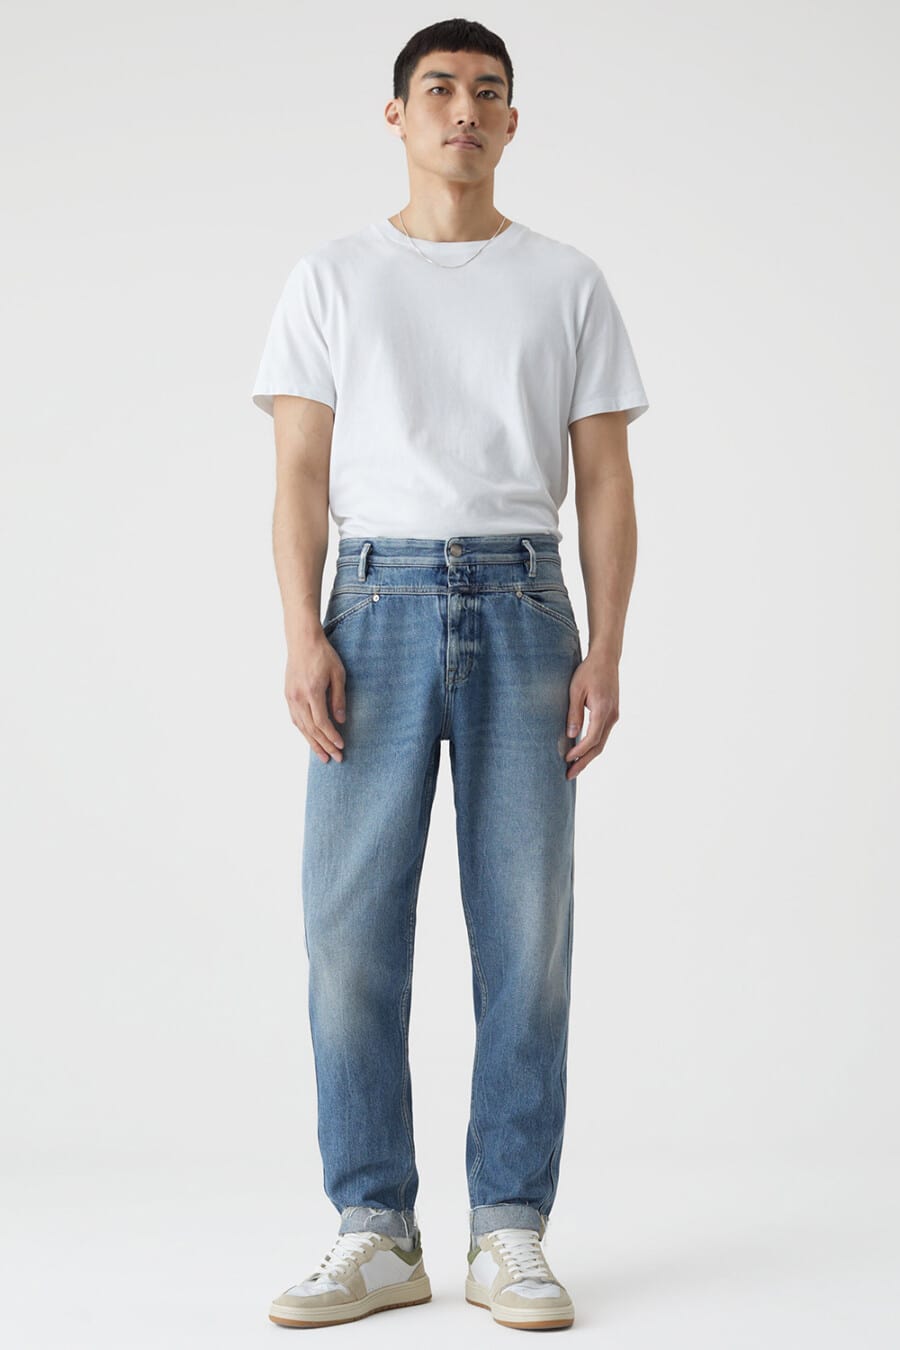 Men's baggy light wash jeans, tucked in white T-shirt, silver necklace chain and white/beige chunky sneakers